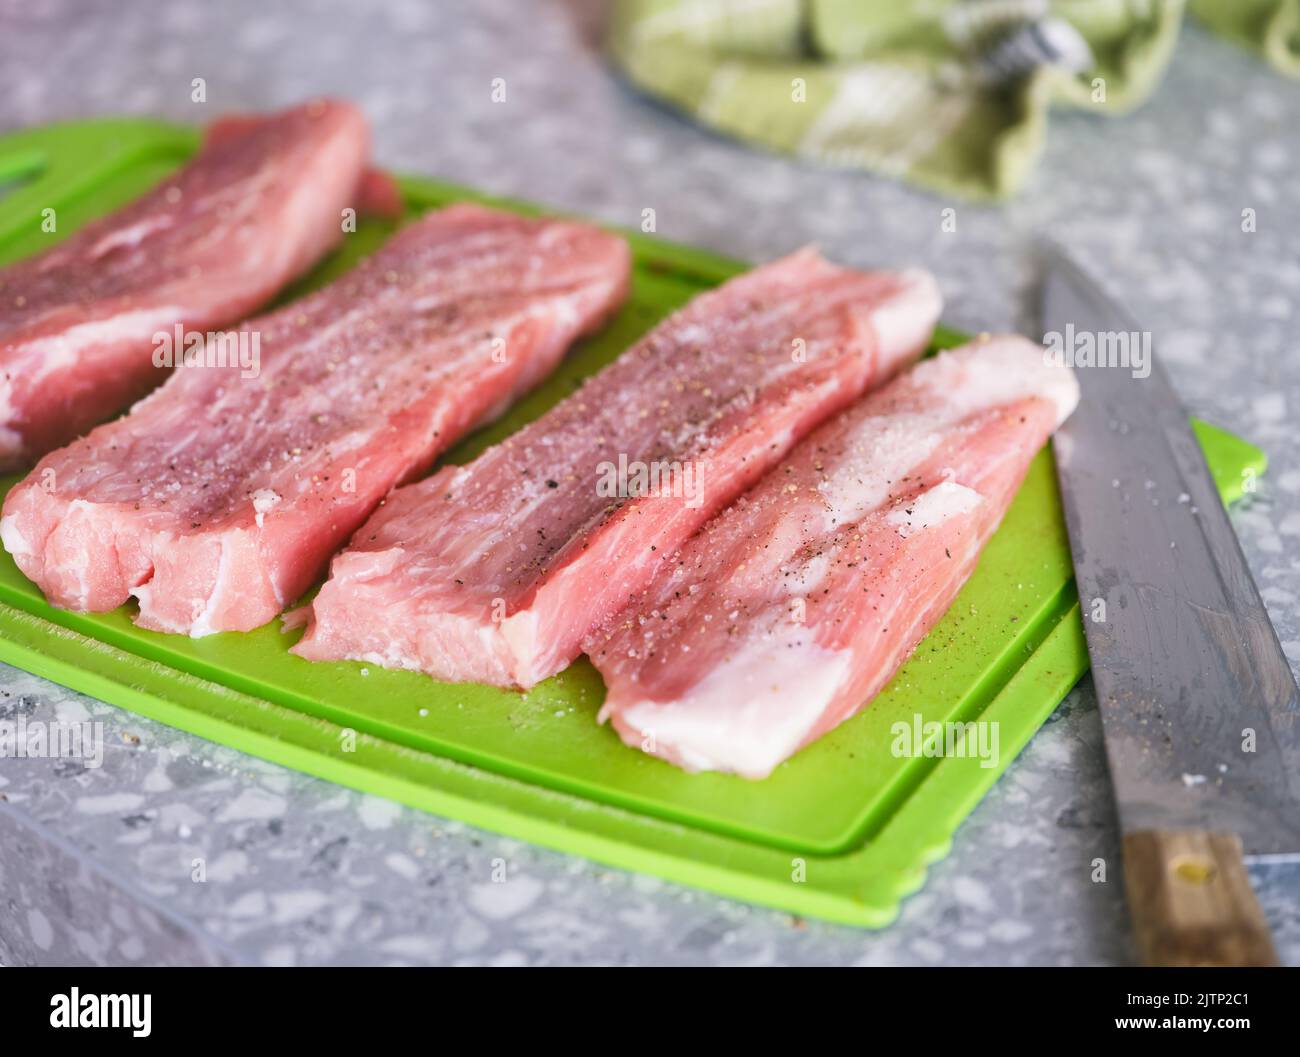 Peppered and salted raw pork slices on a green cutting board and a knife on a kitchen table Stock Photo